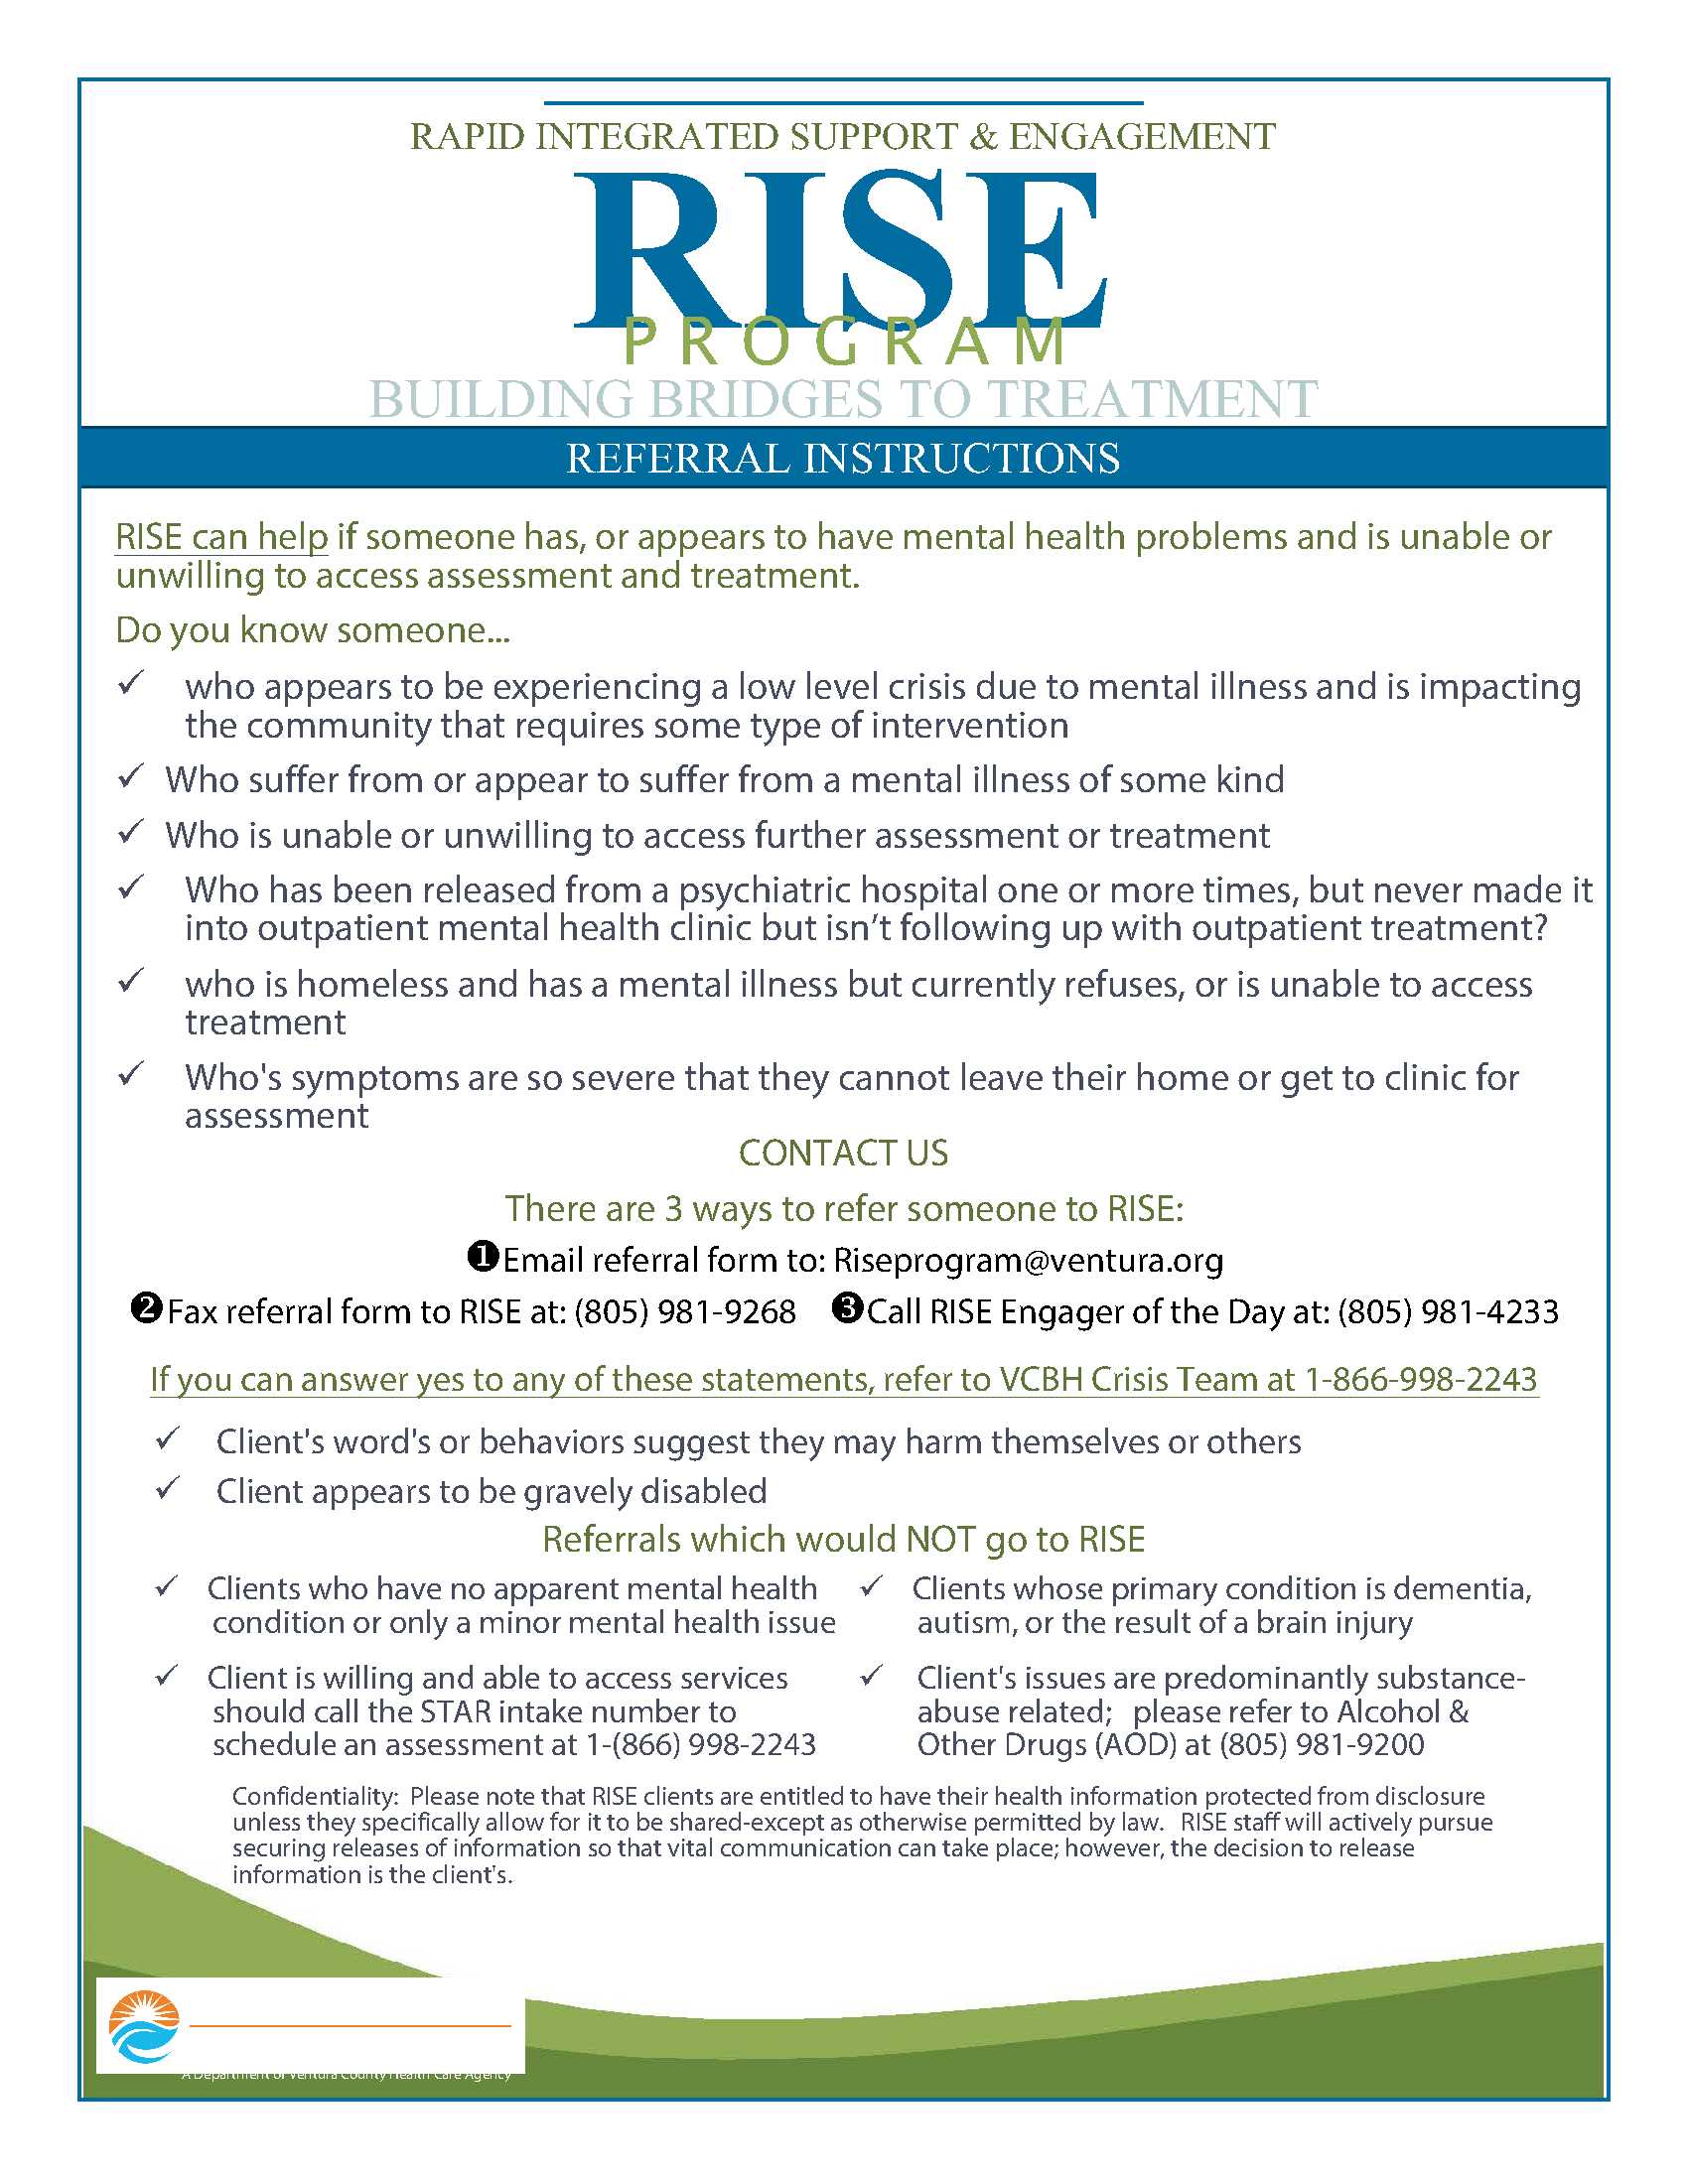 Rapid Integrated Support and Engagement Program flyer. vcbh.org/en/get-help/rise-program Rapid Integrated Support &amp; Engagement RISE Program Building Bridges to Treatment Referral Instructions • RISE can help if someone has or appears to have mental health problems and is unable or unwilling to access assessment and treatment. Do you know someone… Who appears to be experiencing a low level crisis due to mental illness and is impacting the community that requires some type of intervention • Who suffer from or appear to suffer from a mental illness of some kind • Who is unable or unwilling to access further assessment or treatment • Who has been released from a psychiatric hospital one or more times, but never made it into outpatient mental health clinic but isn’t following up with outpatient treatment • Who is homeless and has a mental illness but currently refuses, or is unable to access treatment • Whose symptoms are so severe that they cannot leave their home or get to a clinic for assessment • Contact Us: There are 3 ways to refer someone to RISE: Email referral form to: Riseprogram@ventura.org, Fax referral to RISE at: 805-981-9268, Call RISE Engager of the Day at: 805-981-4233. If you can answer yes to any of these statements, refer VCBH Crisis Team at 1-866-998-2243. Client’s words or behaviors suggest they may harm themselves or others • Client appear to be gravely disabled • Referrals which would not go to RISE • Clients who have no apparent mental health condition or only a minor mental health issue • Client is willing and able to access services should call the STAR intake number to schedule an assessment at 1-866-998-2243. • Clients whose primary condition is dementia, autism, or the result of a brain injury • Client’s issues are predominantly substance abuse related; please refer to Alcohol &amp; Other Drugs (AOD) at 805-981-9222. • Confidentiality: Please note that RISE clients are entitled to have their health information protected from disclosure unless they specifically allow for it to be shared except as otherwise permitted by law. RISE staff will actively pursue securing releases of information so that vital communication can take place; however, the decision to release information is the clients. Ventura County Behavioral Health RISE Program flyer. www.vcbh.org/en/get-help/rise-program